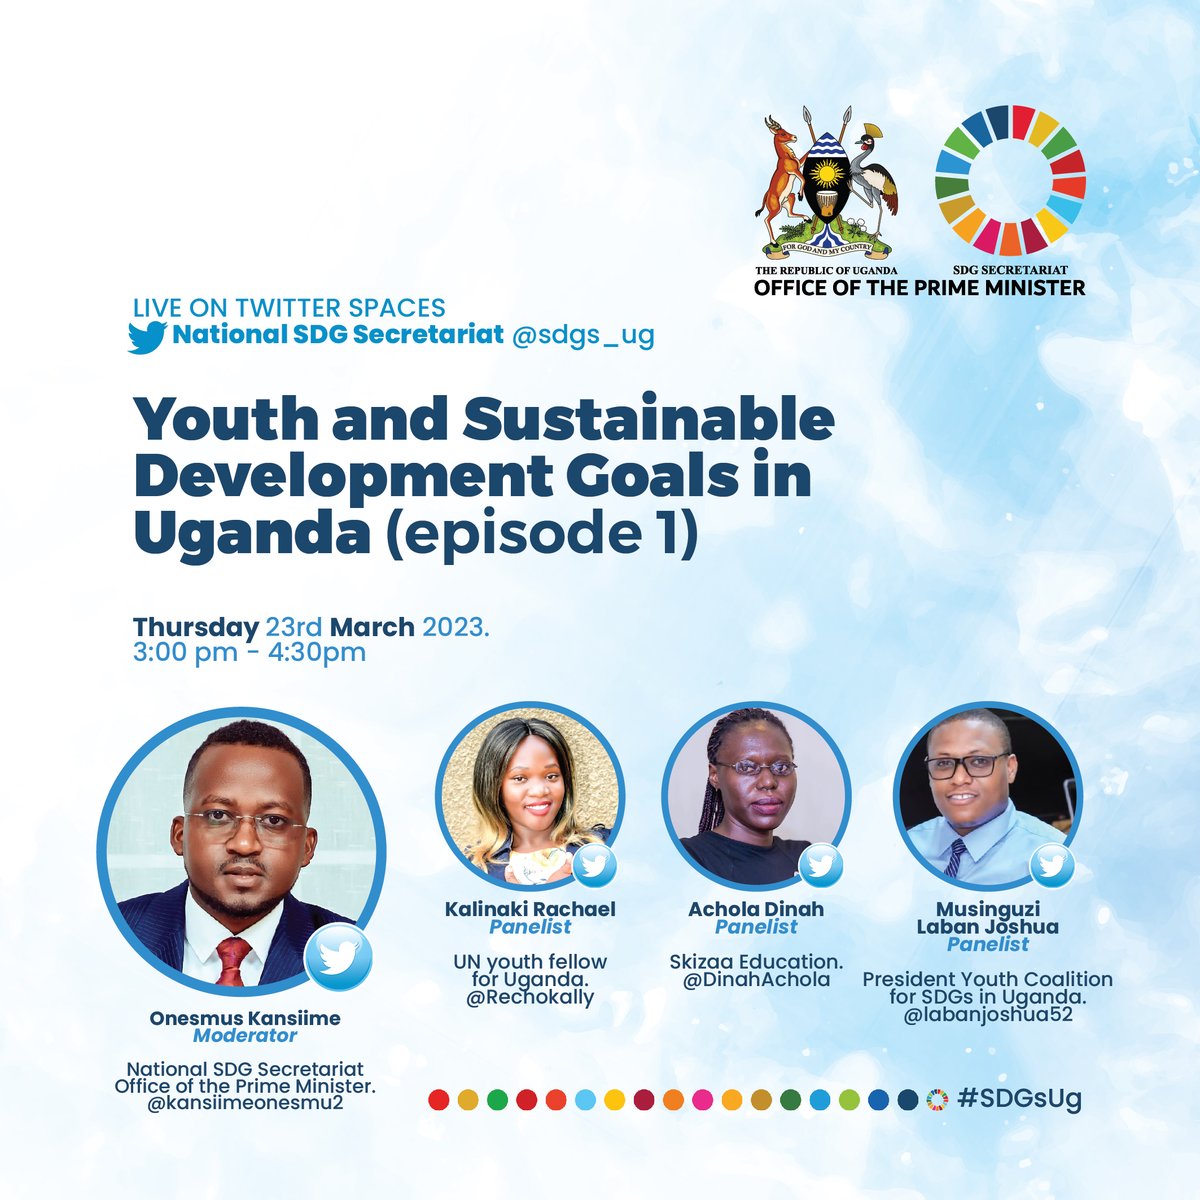 It has been established & is true; youth are key stakeholders in the implementation of #SDGs as vital energy, enthusiasm, & creativity for sustainable development. Join us tomorrow for the twitter space as we showcase the contribution of youth on SDGs. #SDGsUg